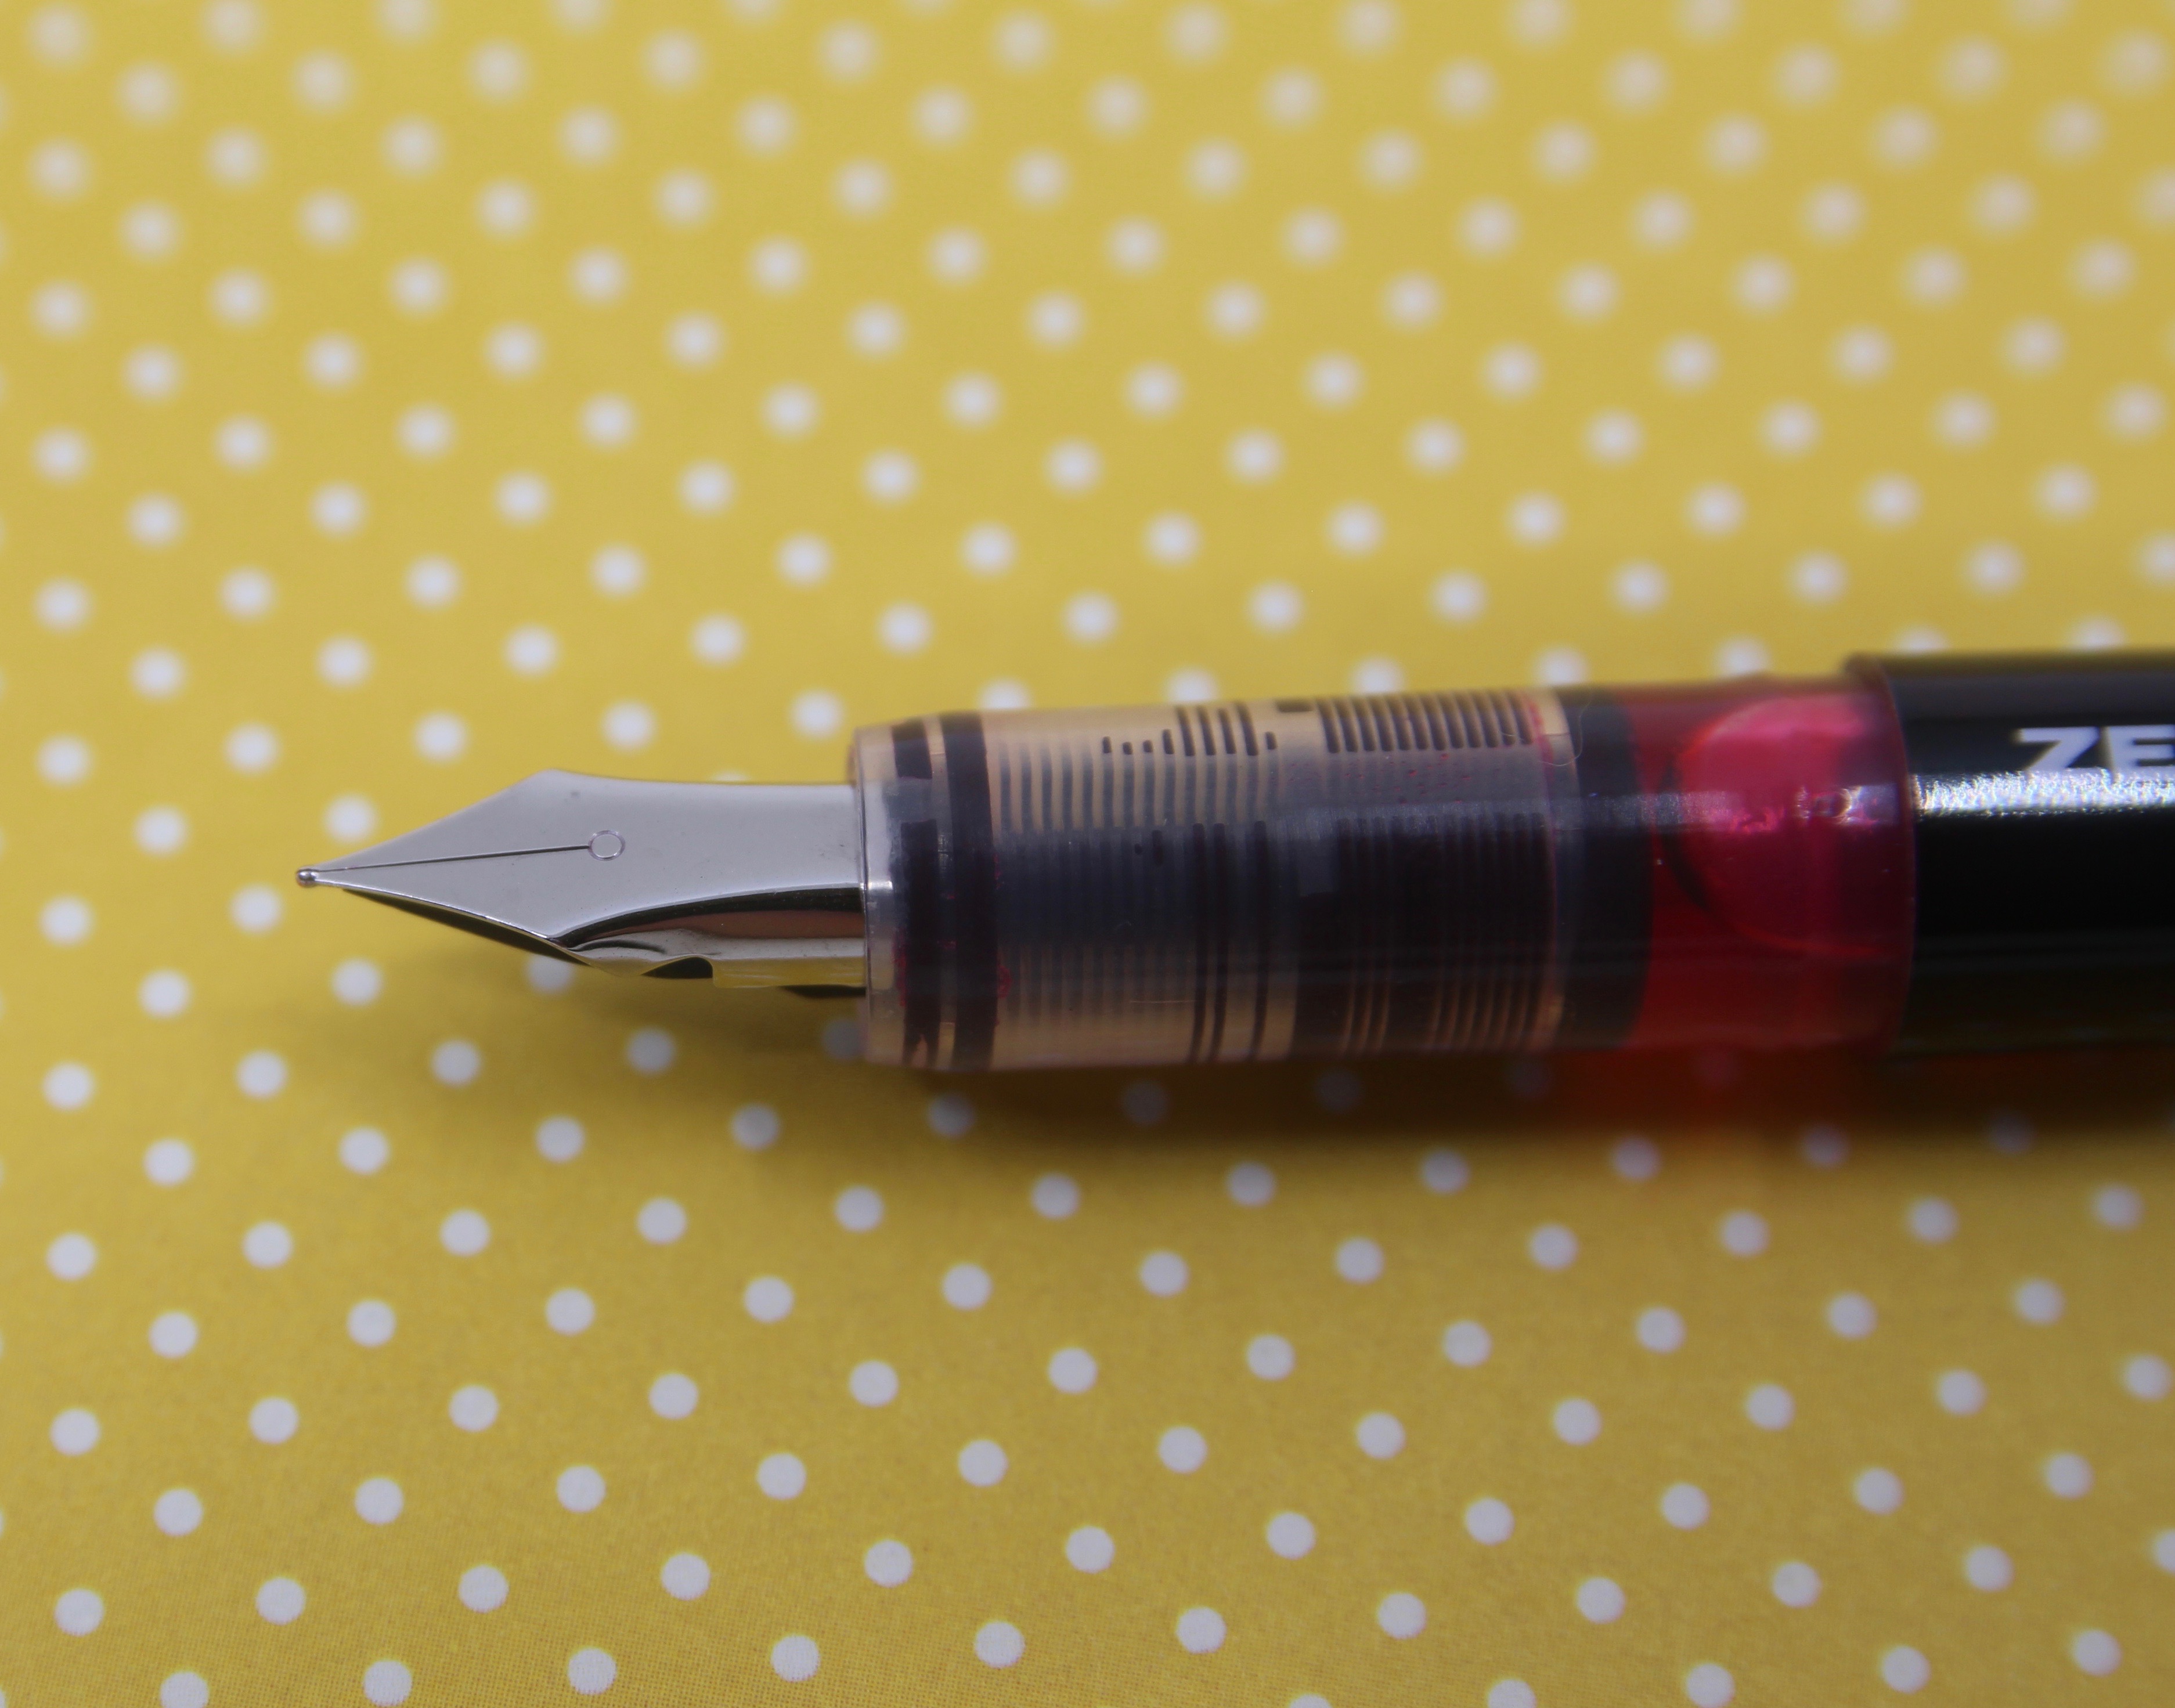 A look at the Pilot V disposable fountain pen and how to refill one.